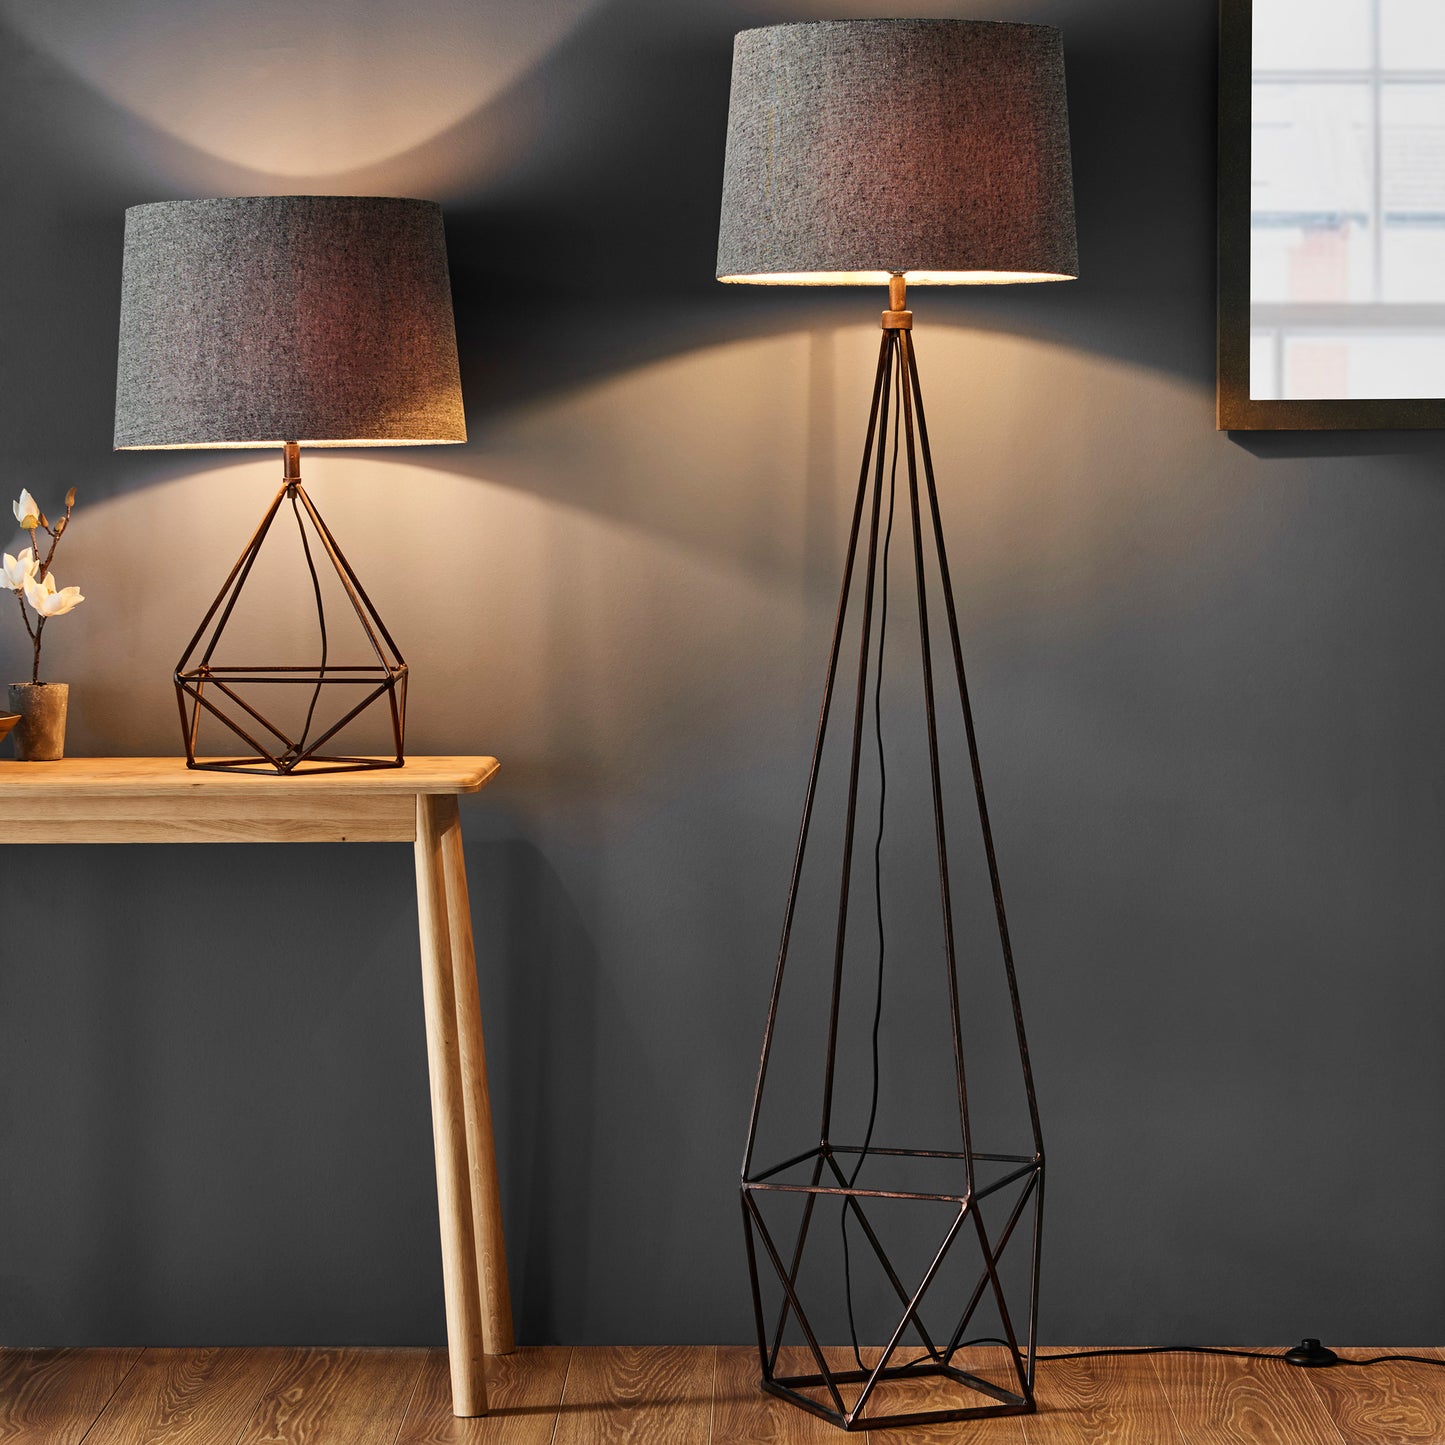 A geometric floor lamp and two Bow 1 Table Lights from Kikiathome.co.uk showcasing interior decor on a table.